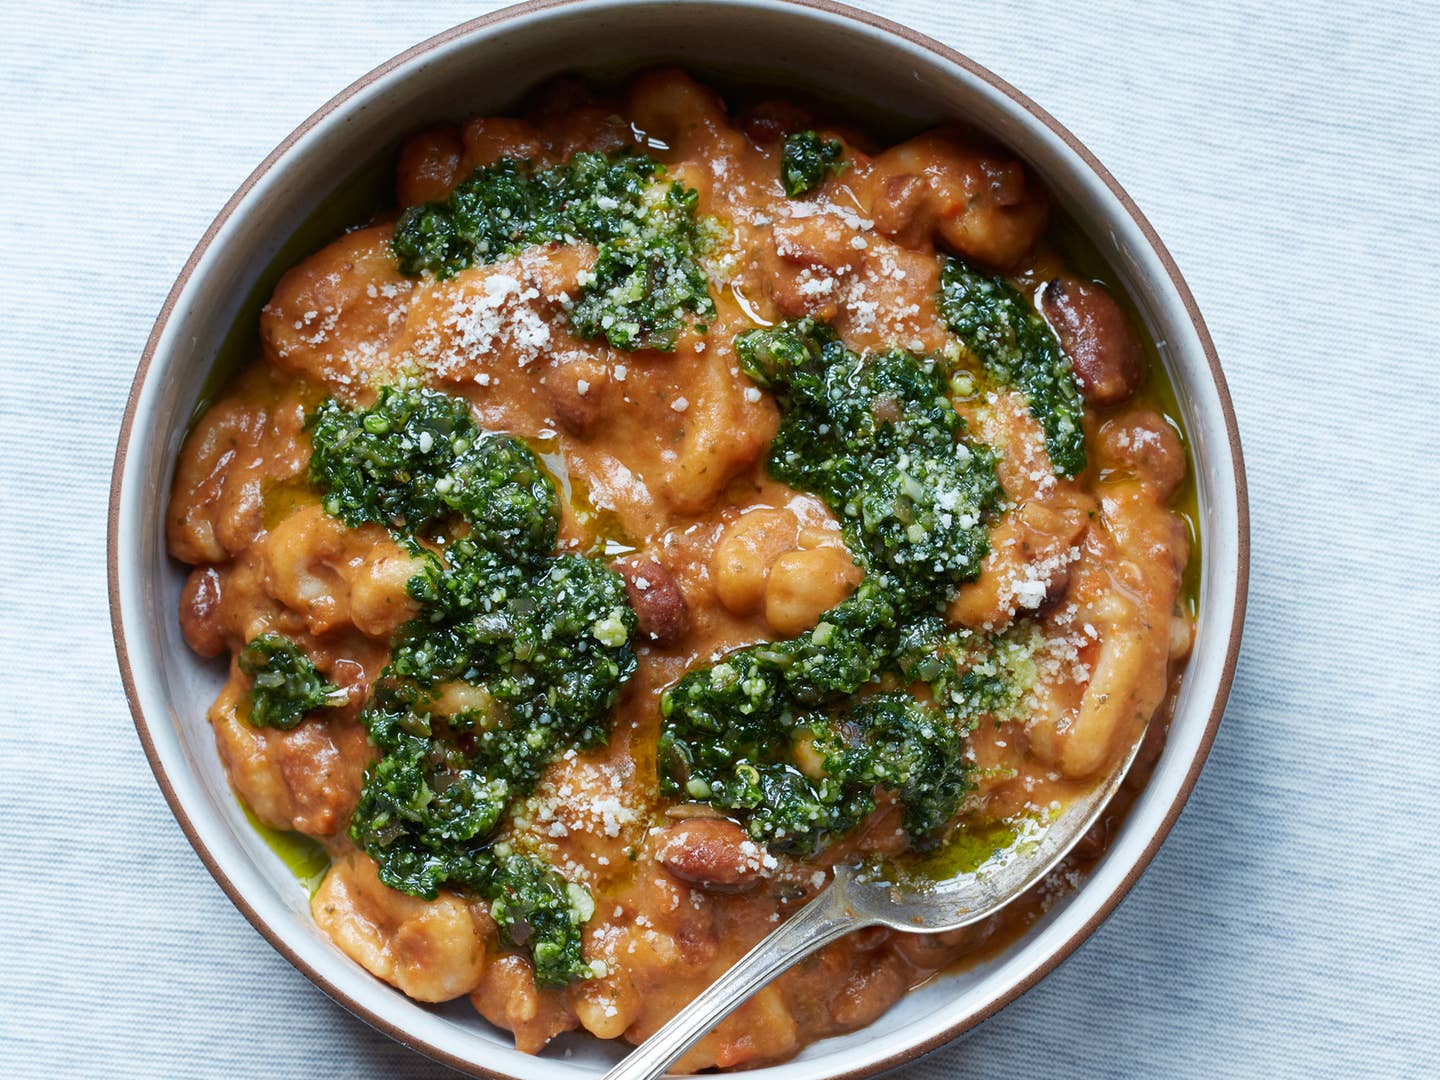 Make Gnocchi With Bread Crumbs for the Ultimate Thrifty Meal